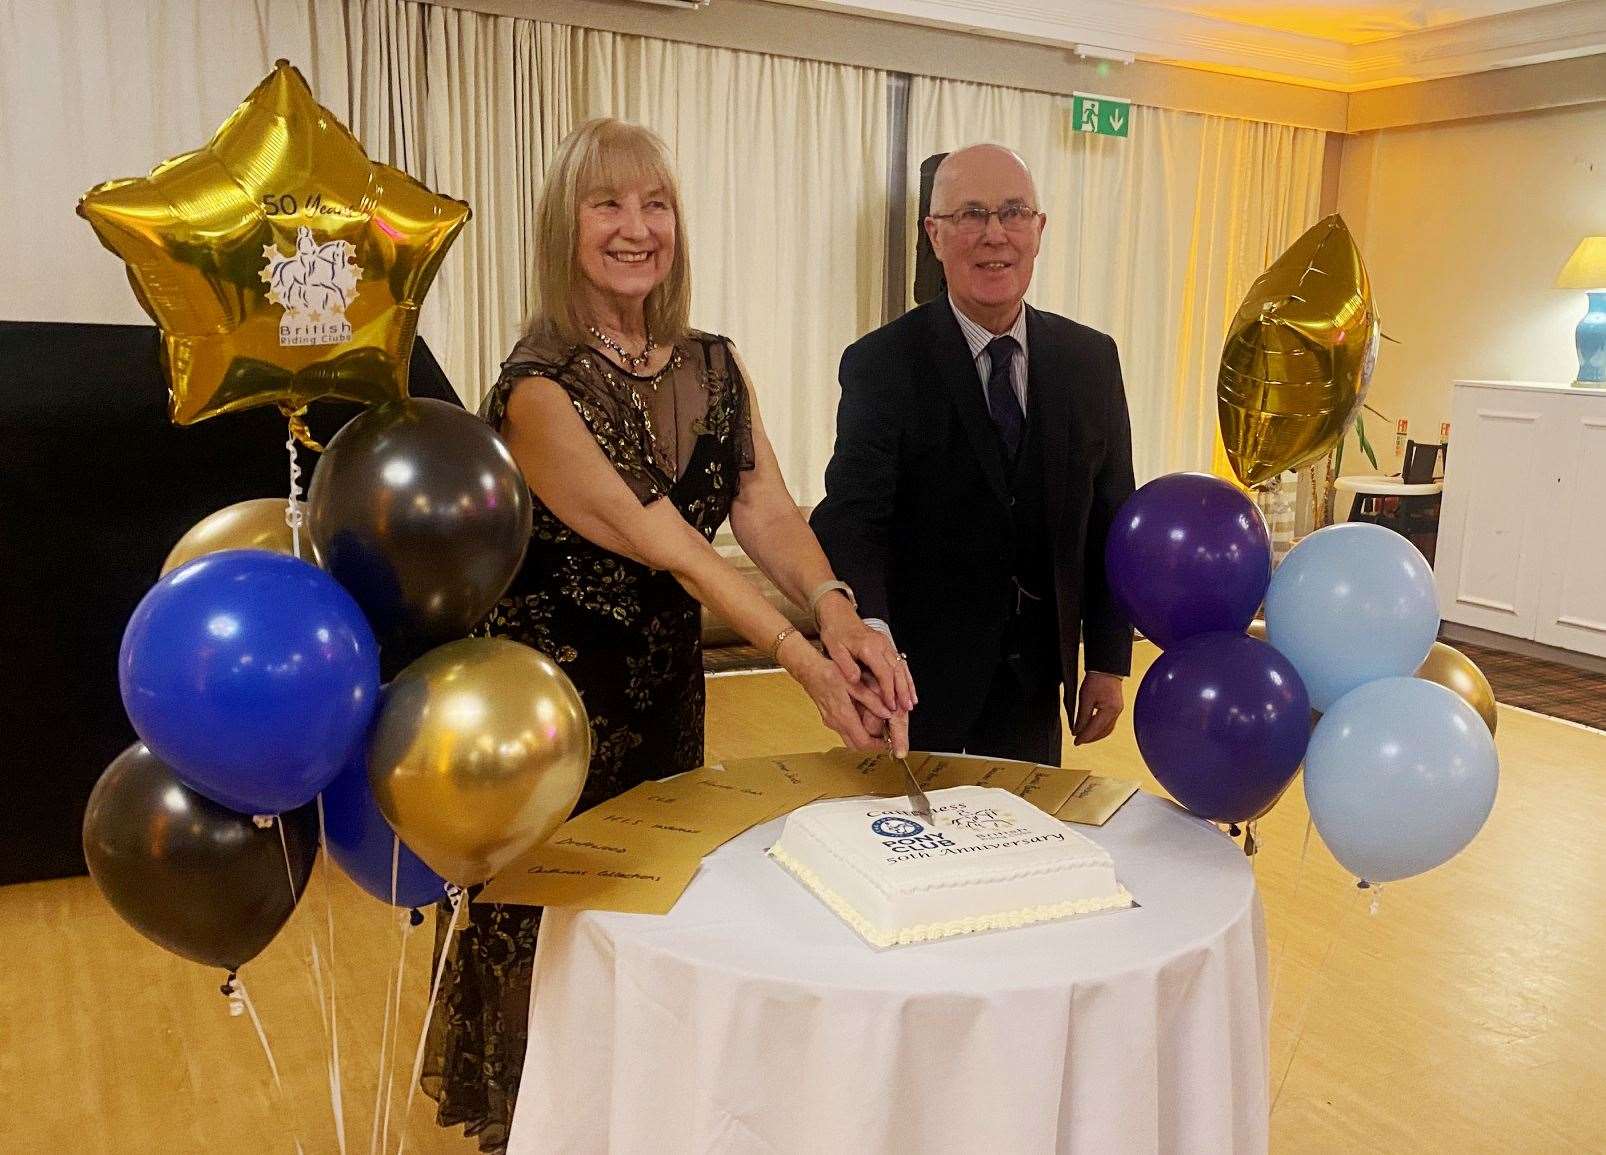 Pauline and George Coghill, Stemster, who were both on the first riding club committee, cutting the cake. George was the treasurer.